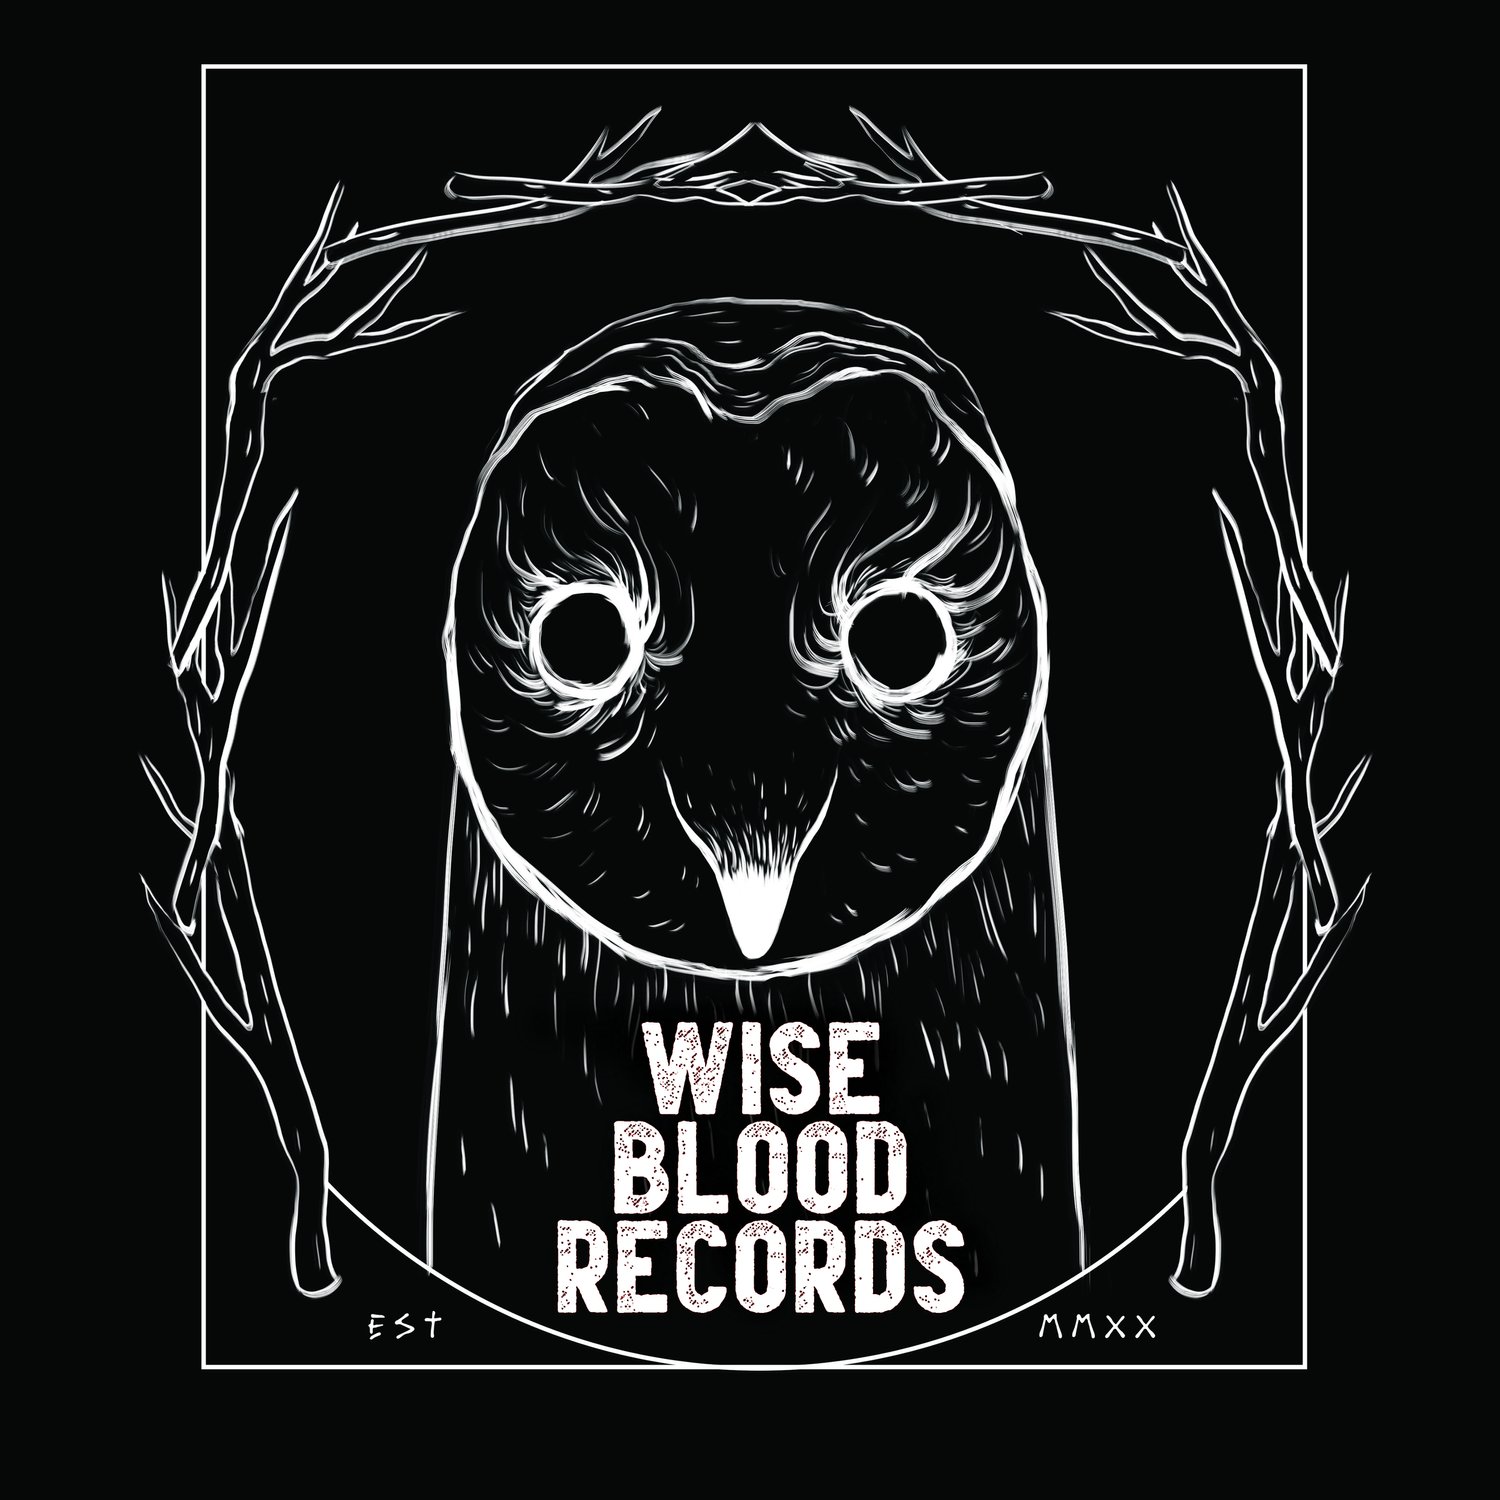 Wise Blood Records